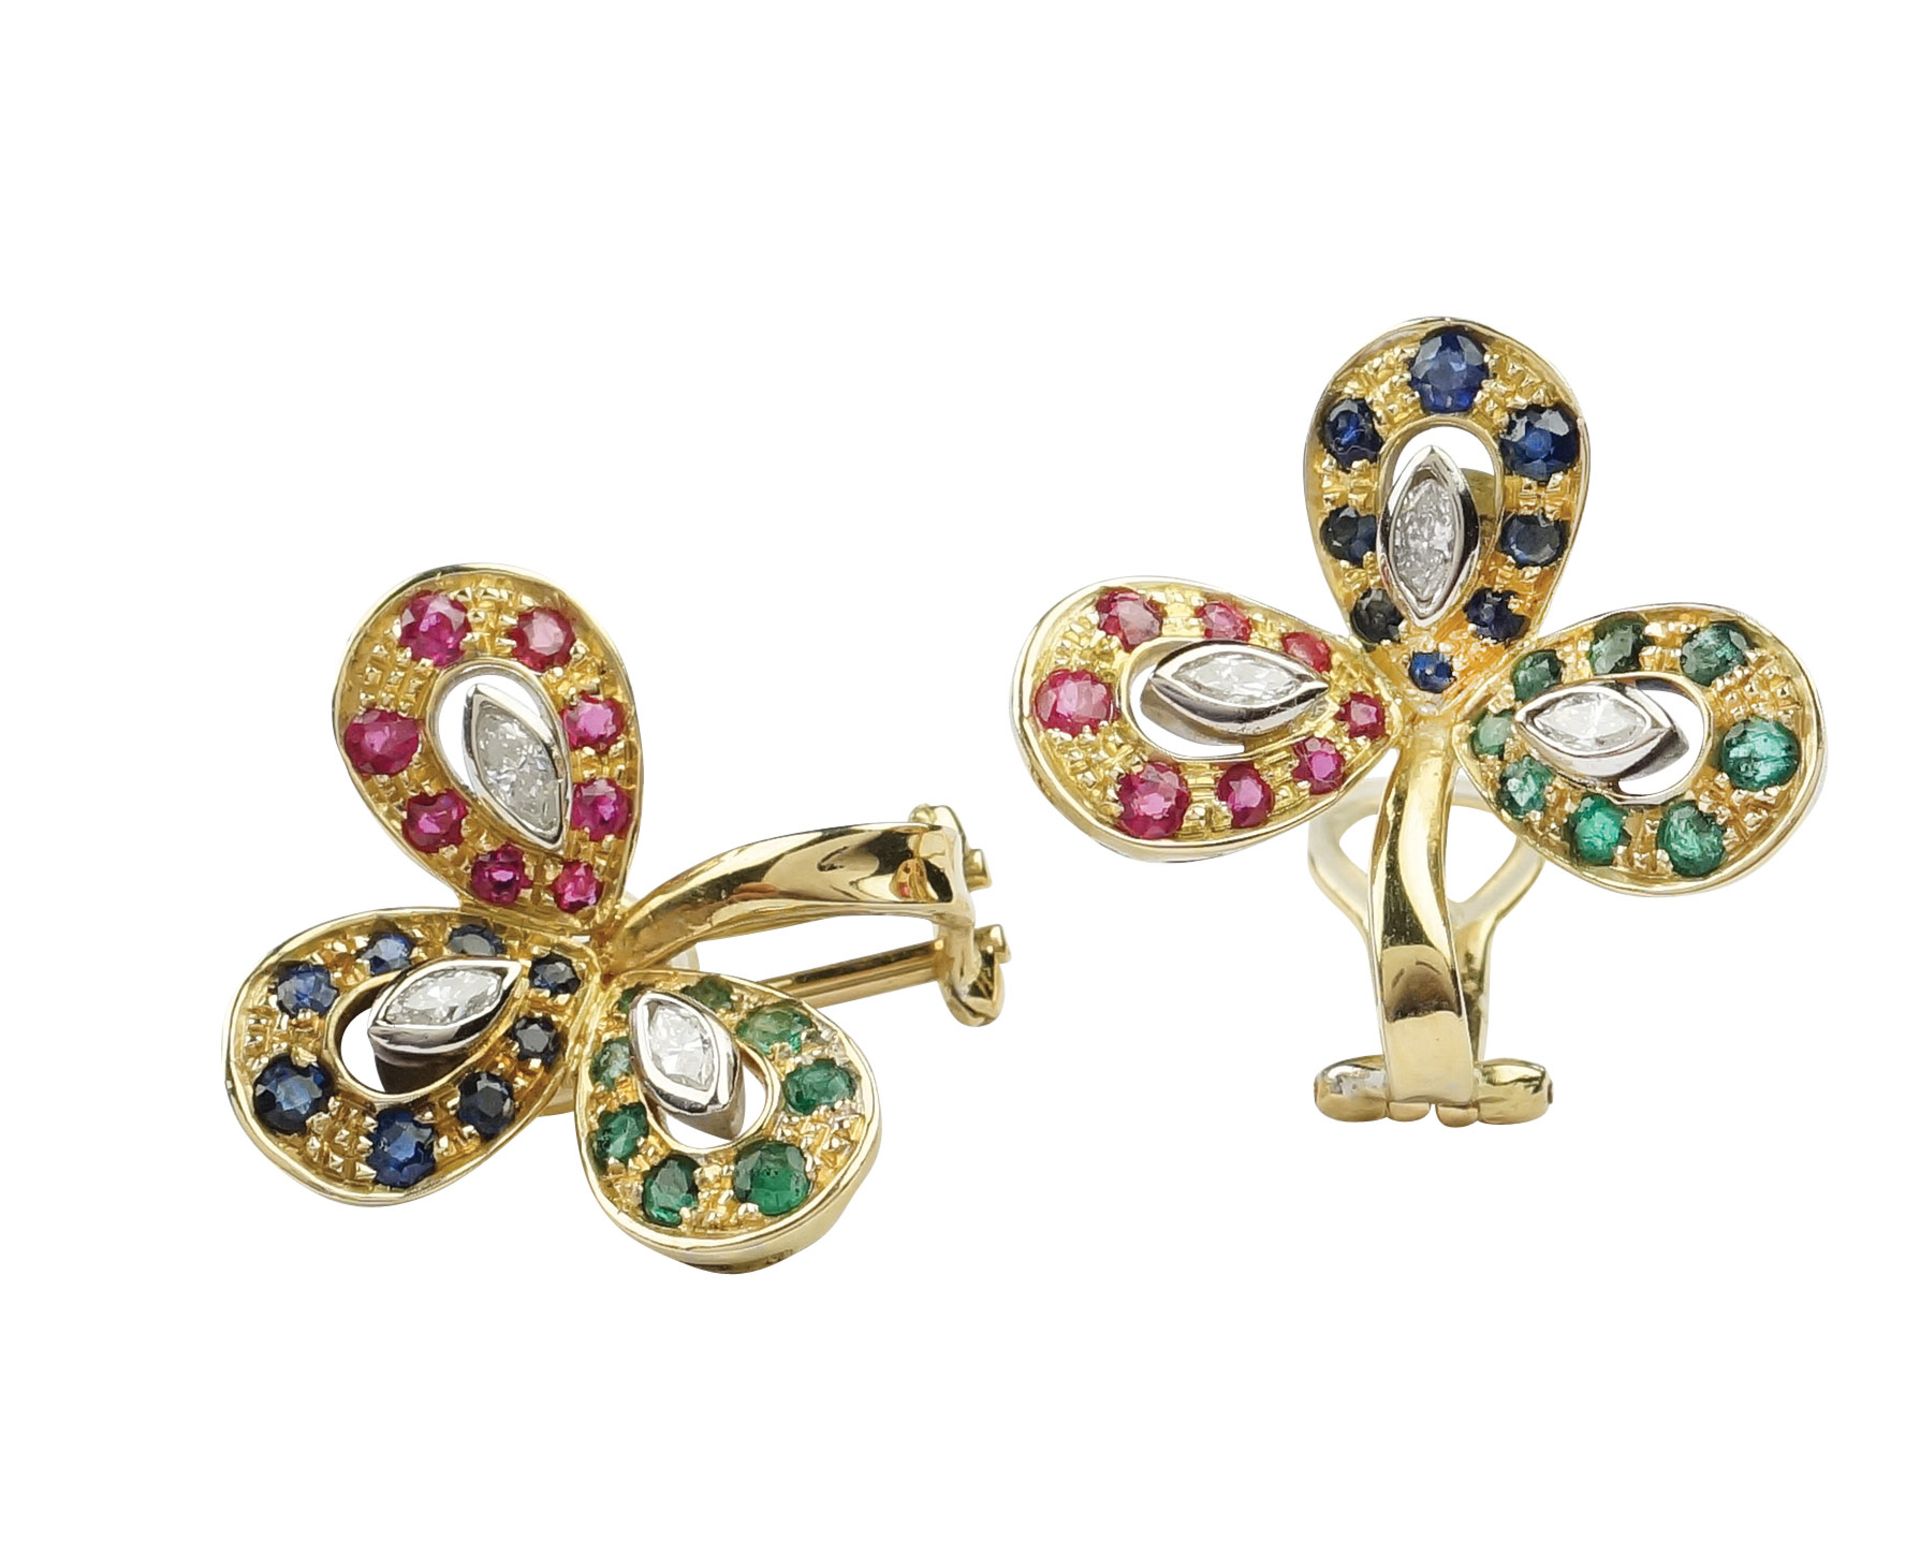 A pair of 18k white and yellow gold shamrock shaped earrings